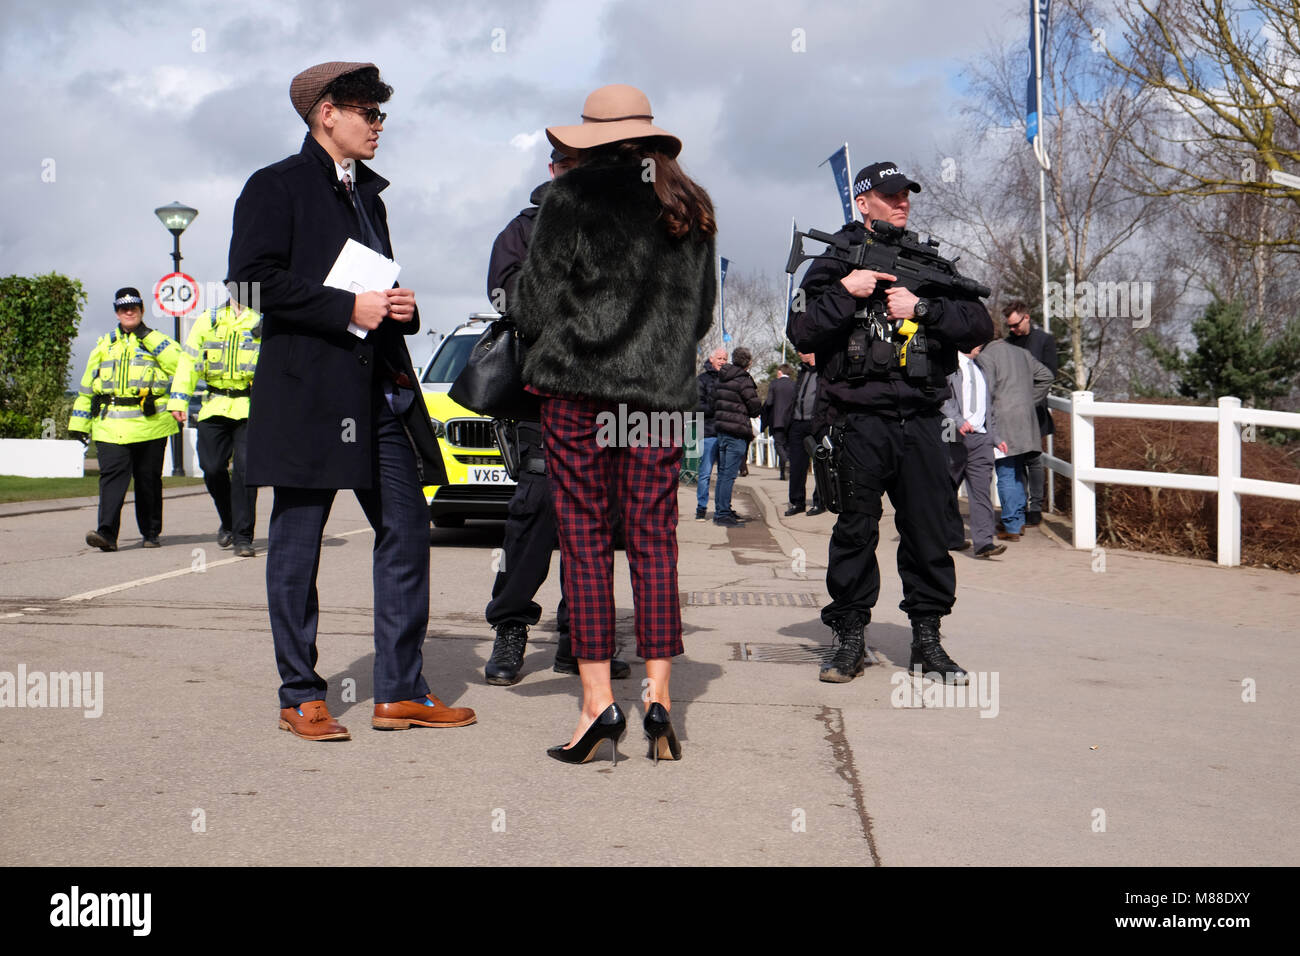 Cheltenham Festival, Gloucestershire, UK - Friday 16th March 2018 - Race goers chat with armed Police officers at the Cheltenham racing festival ahead of this afternoons classic Gold Cup race.  Steven May / Alamy Live News Stock Photo